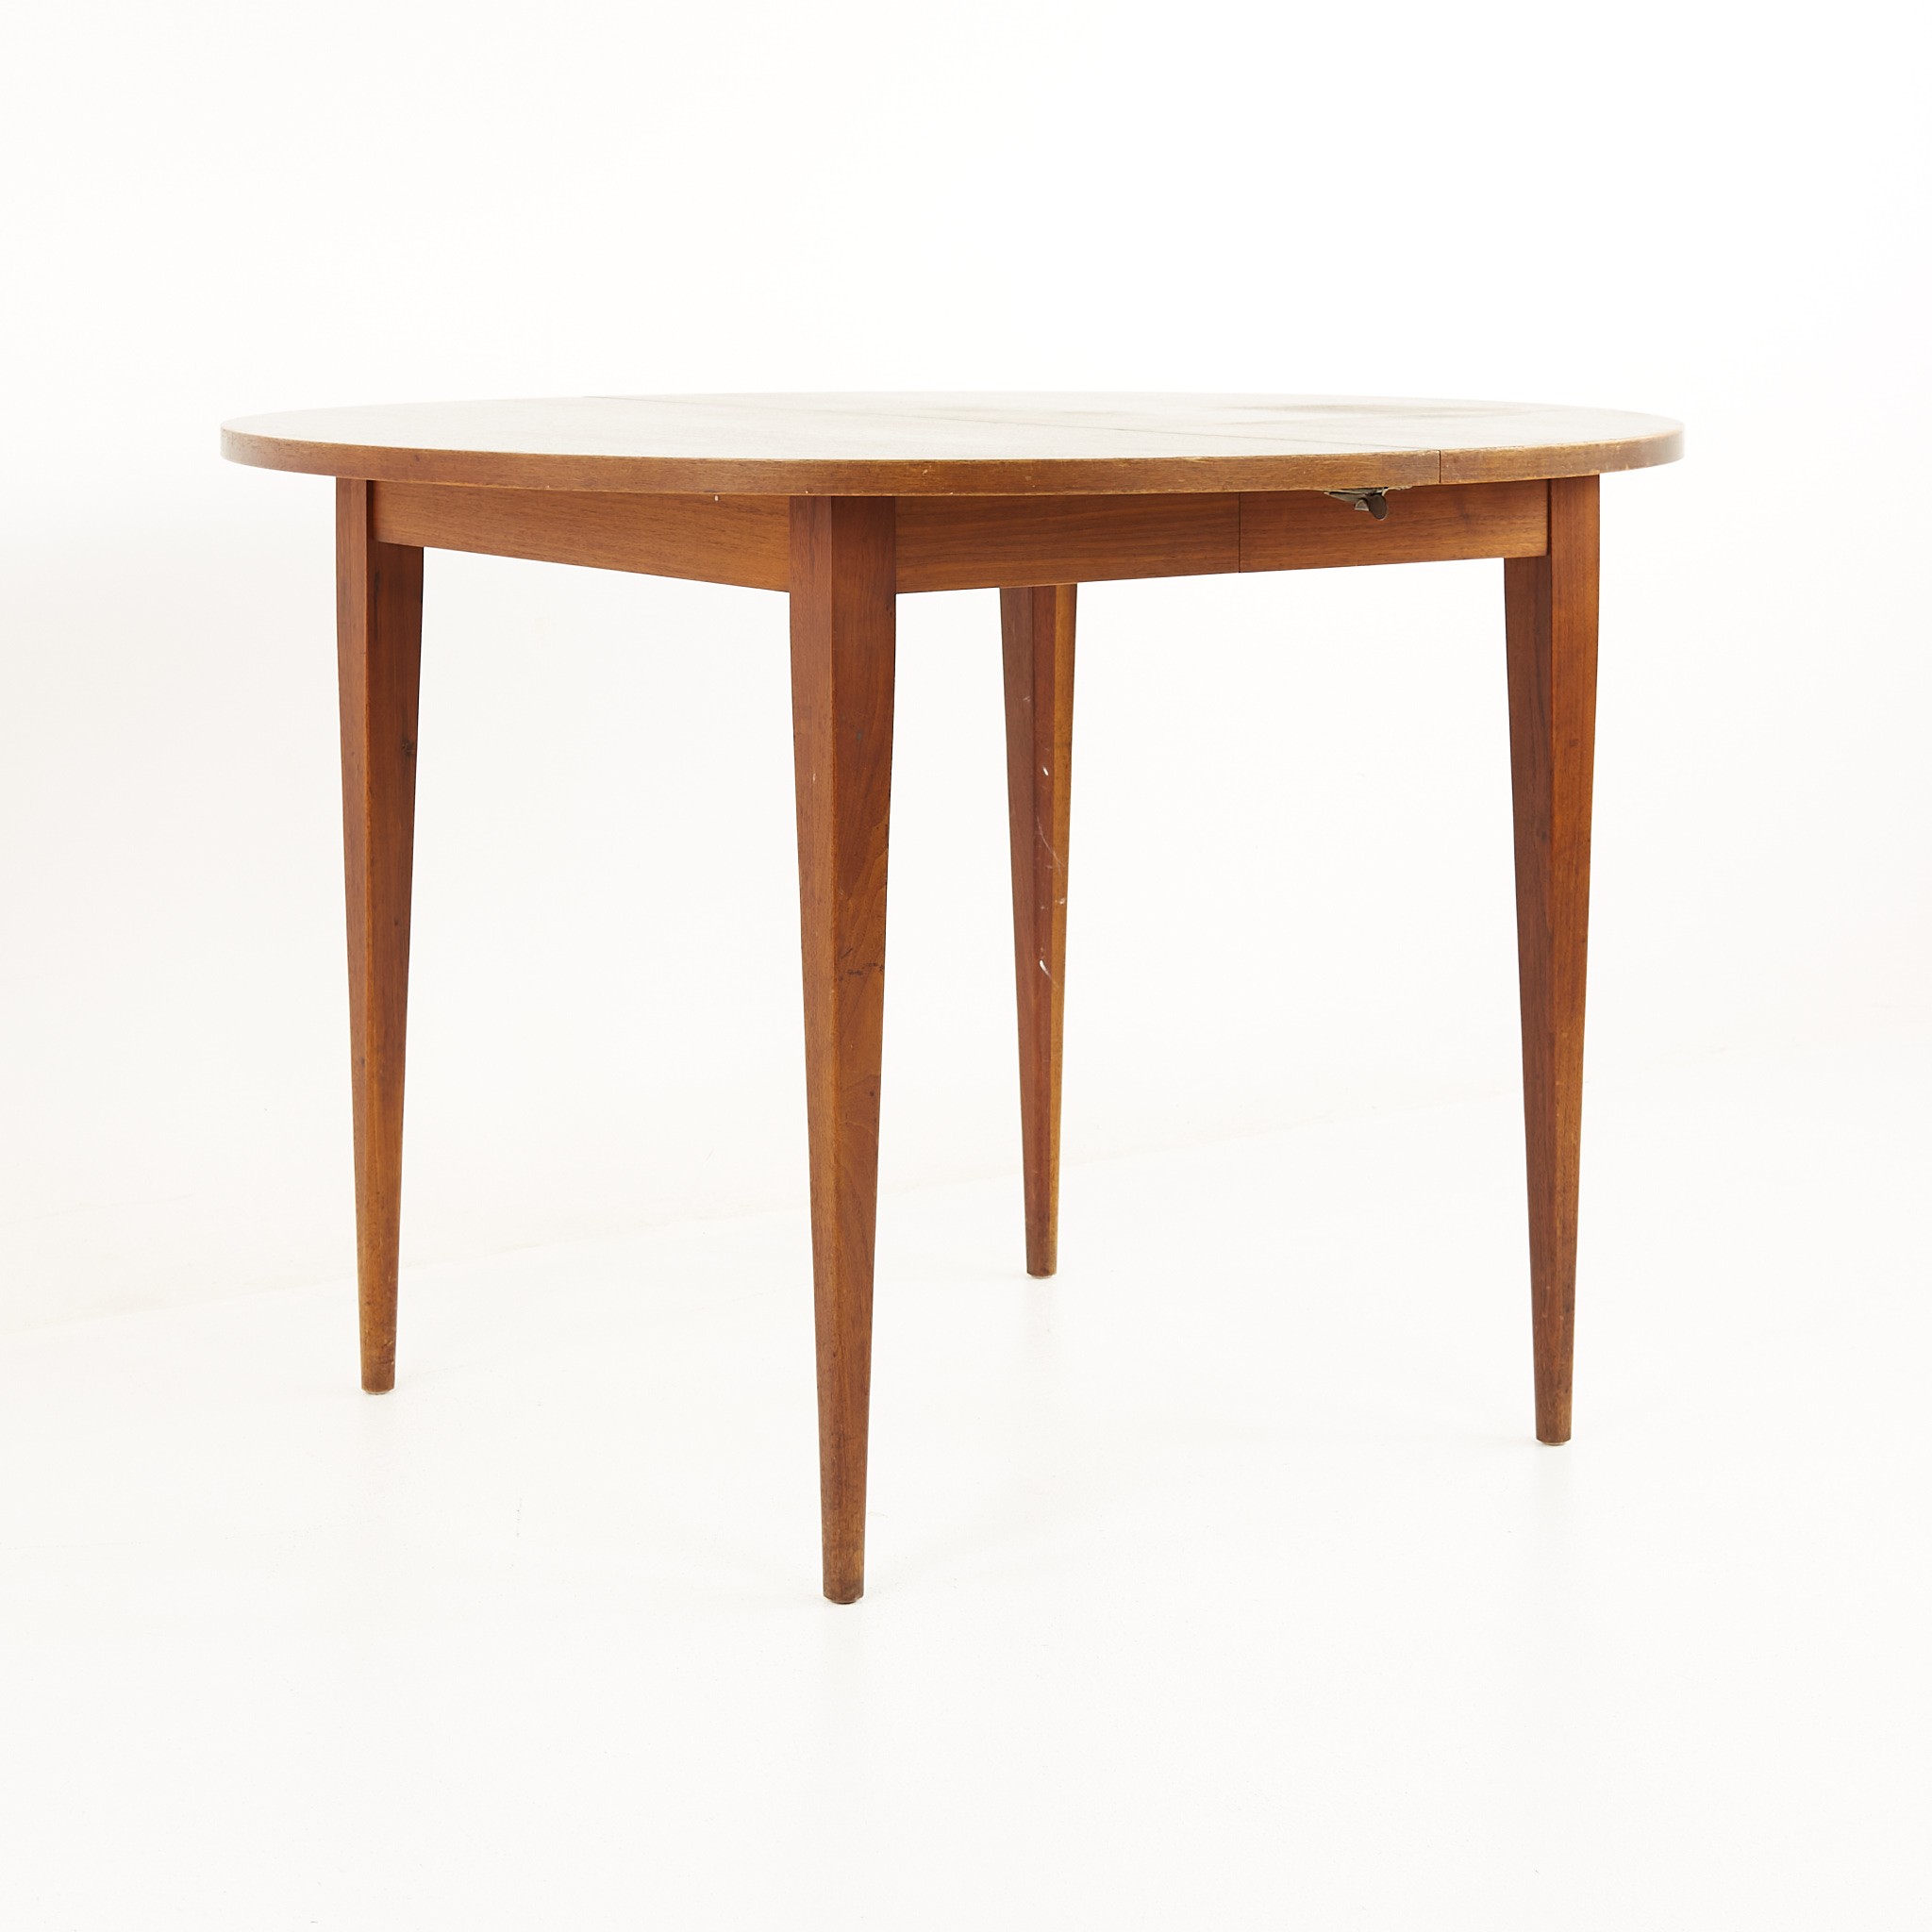 Norman Cherner for Plycraft Mid Century Round Walnut Expanding Dining Table